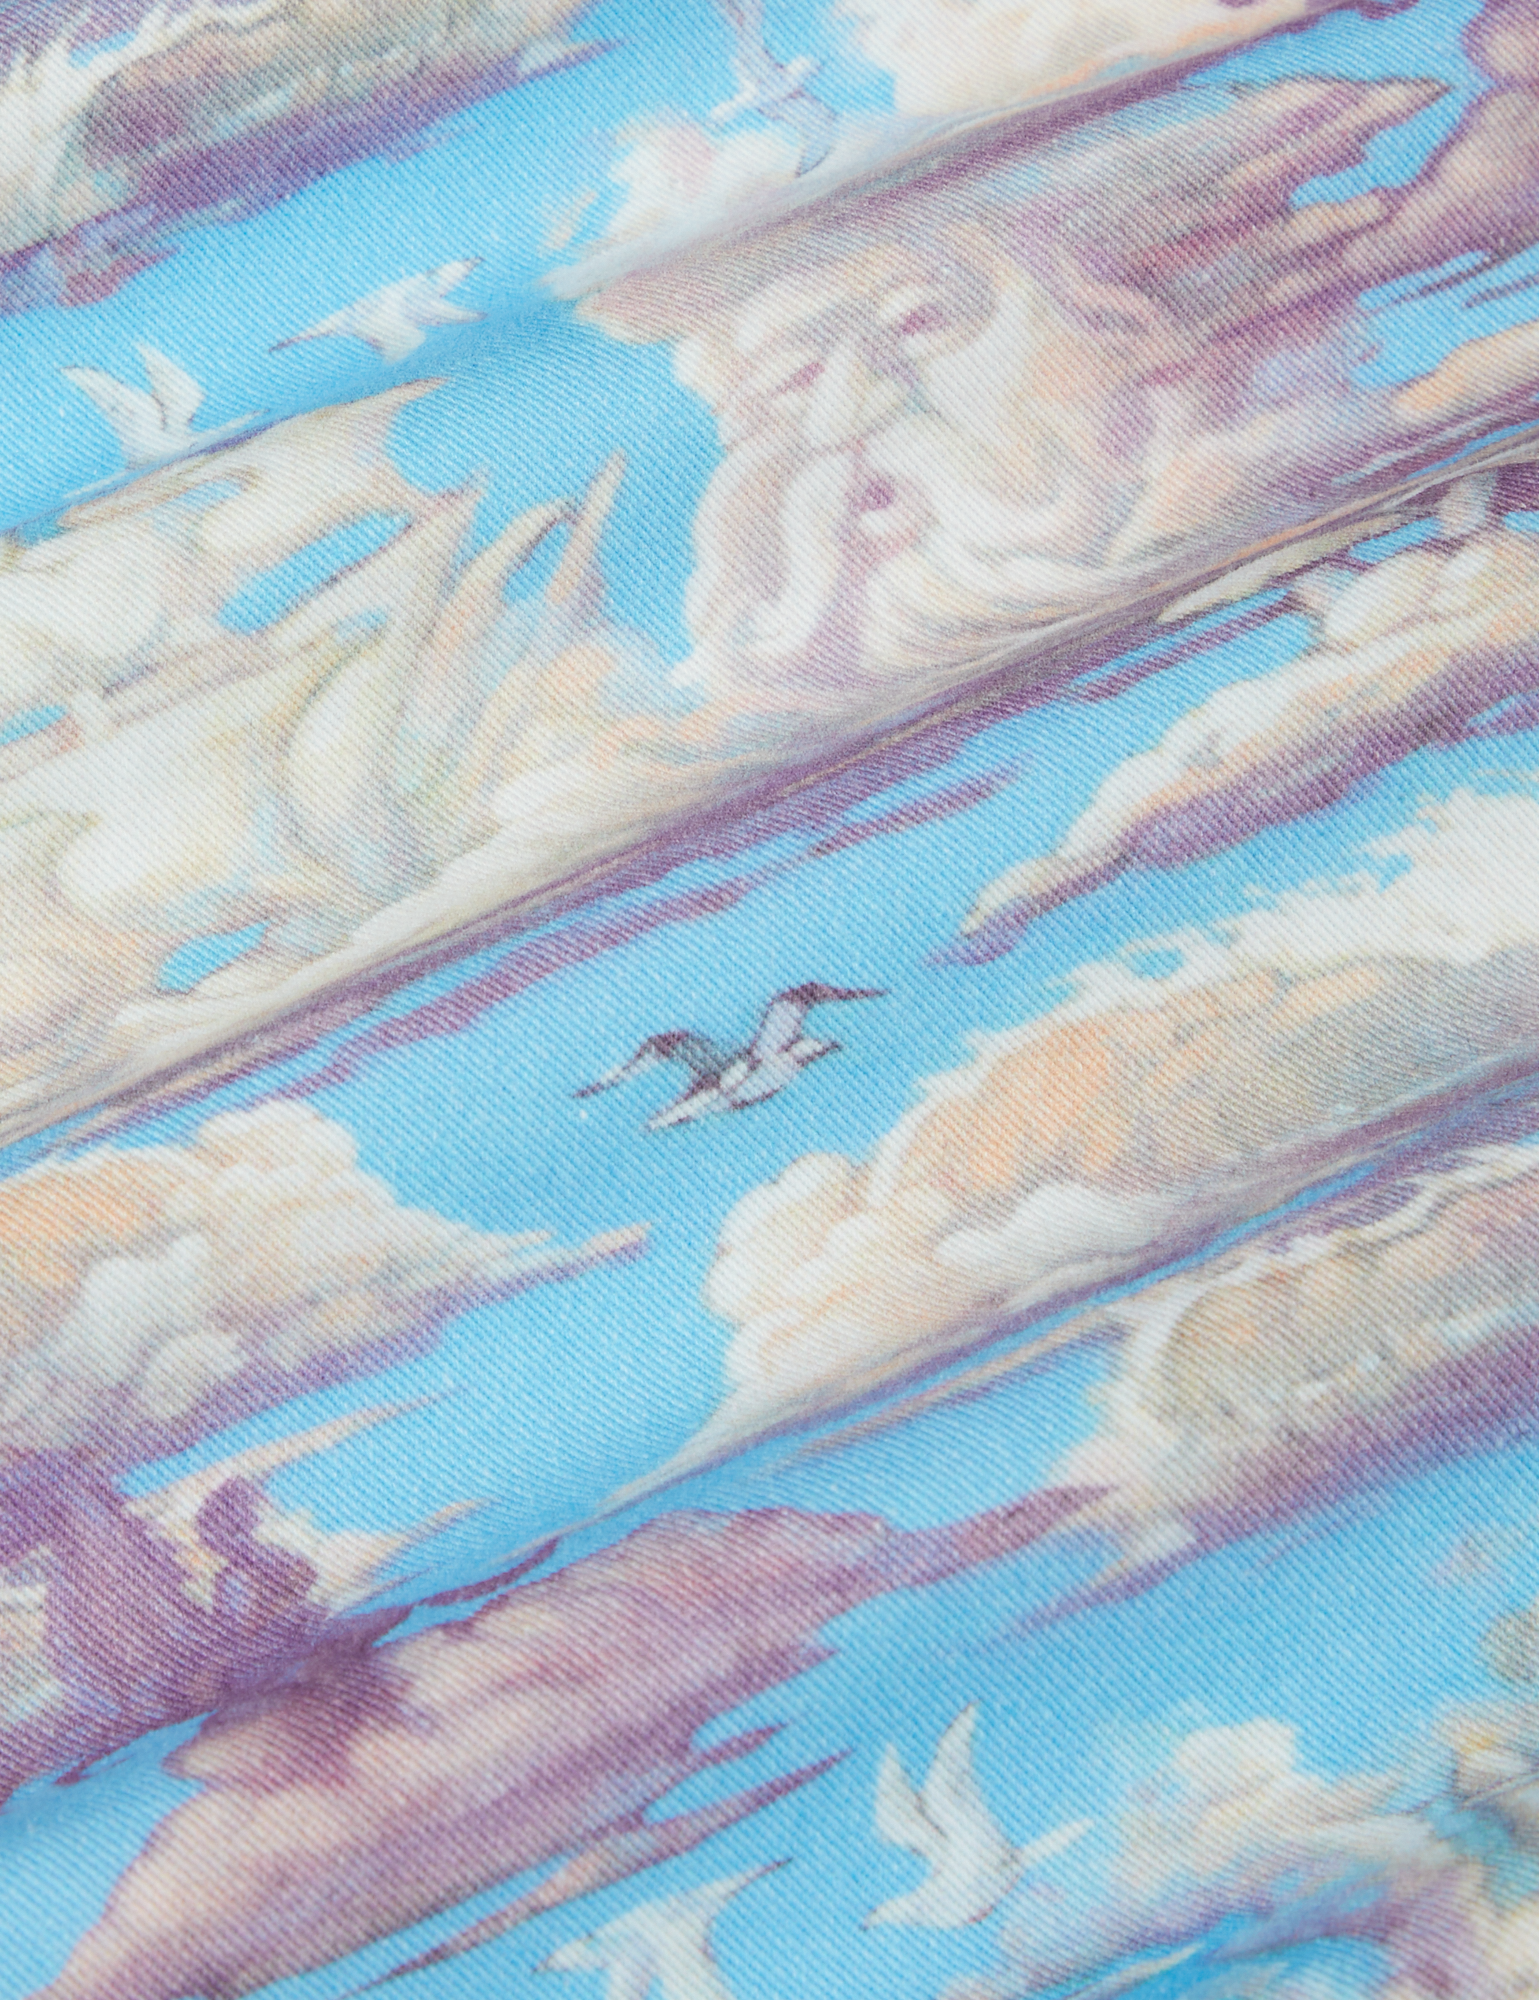 Cloud Kingdom Jumpsuit fabric detail close up. White clouds, birds flying through the sky and a person on a horse.